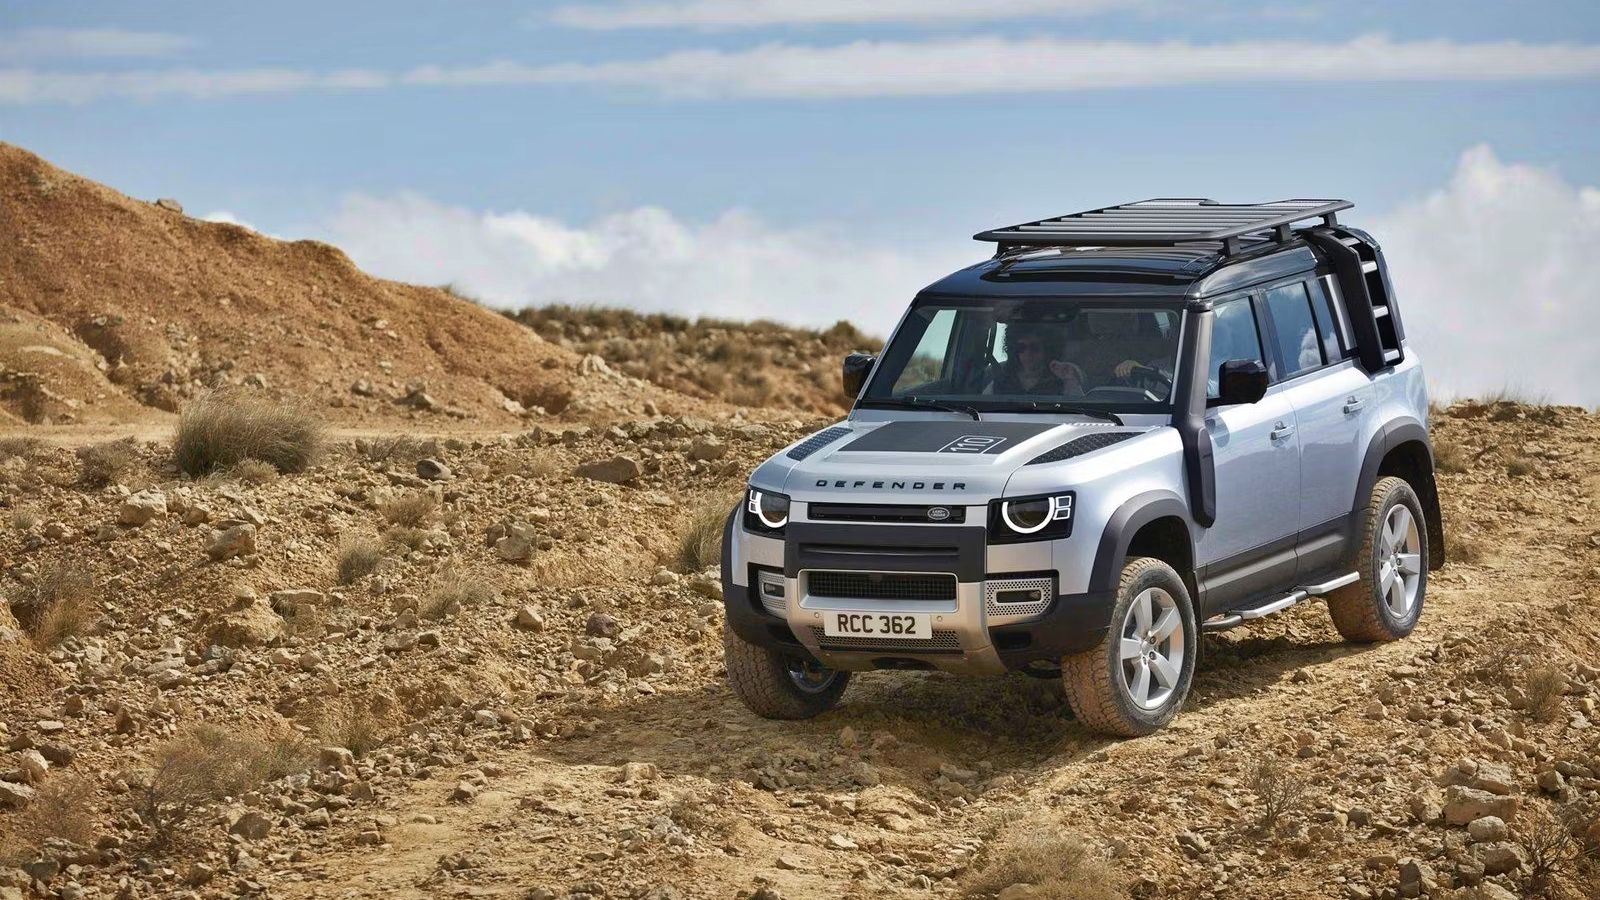 Silver Land Rover Defender On A Dirt Trail